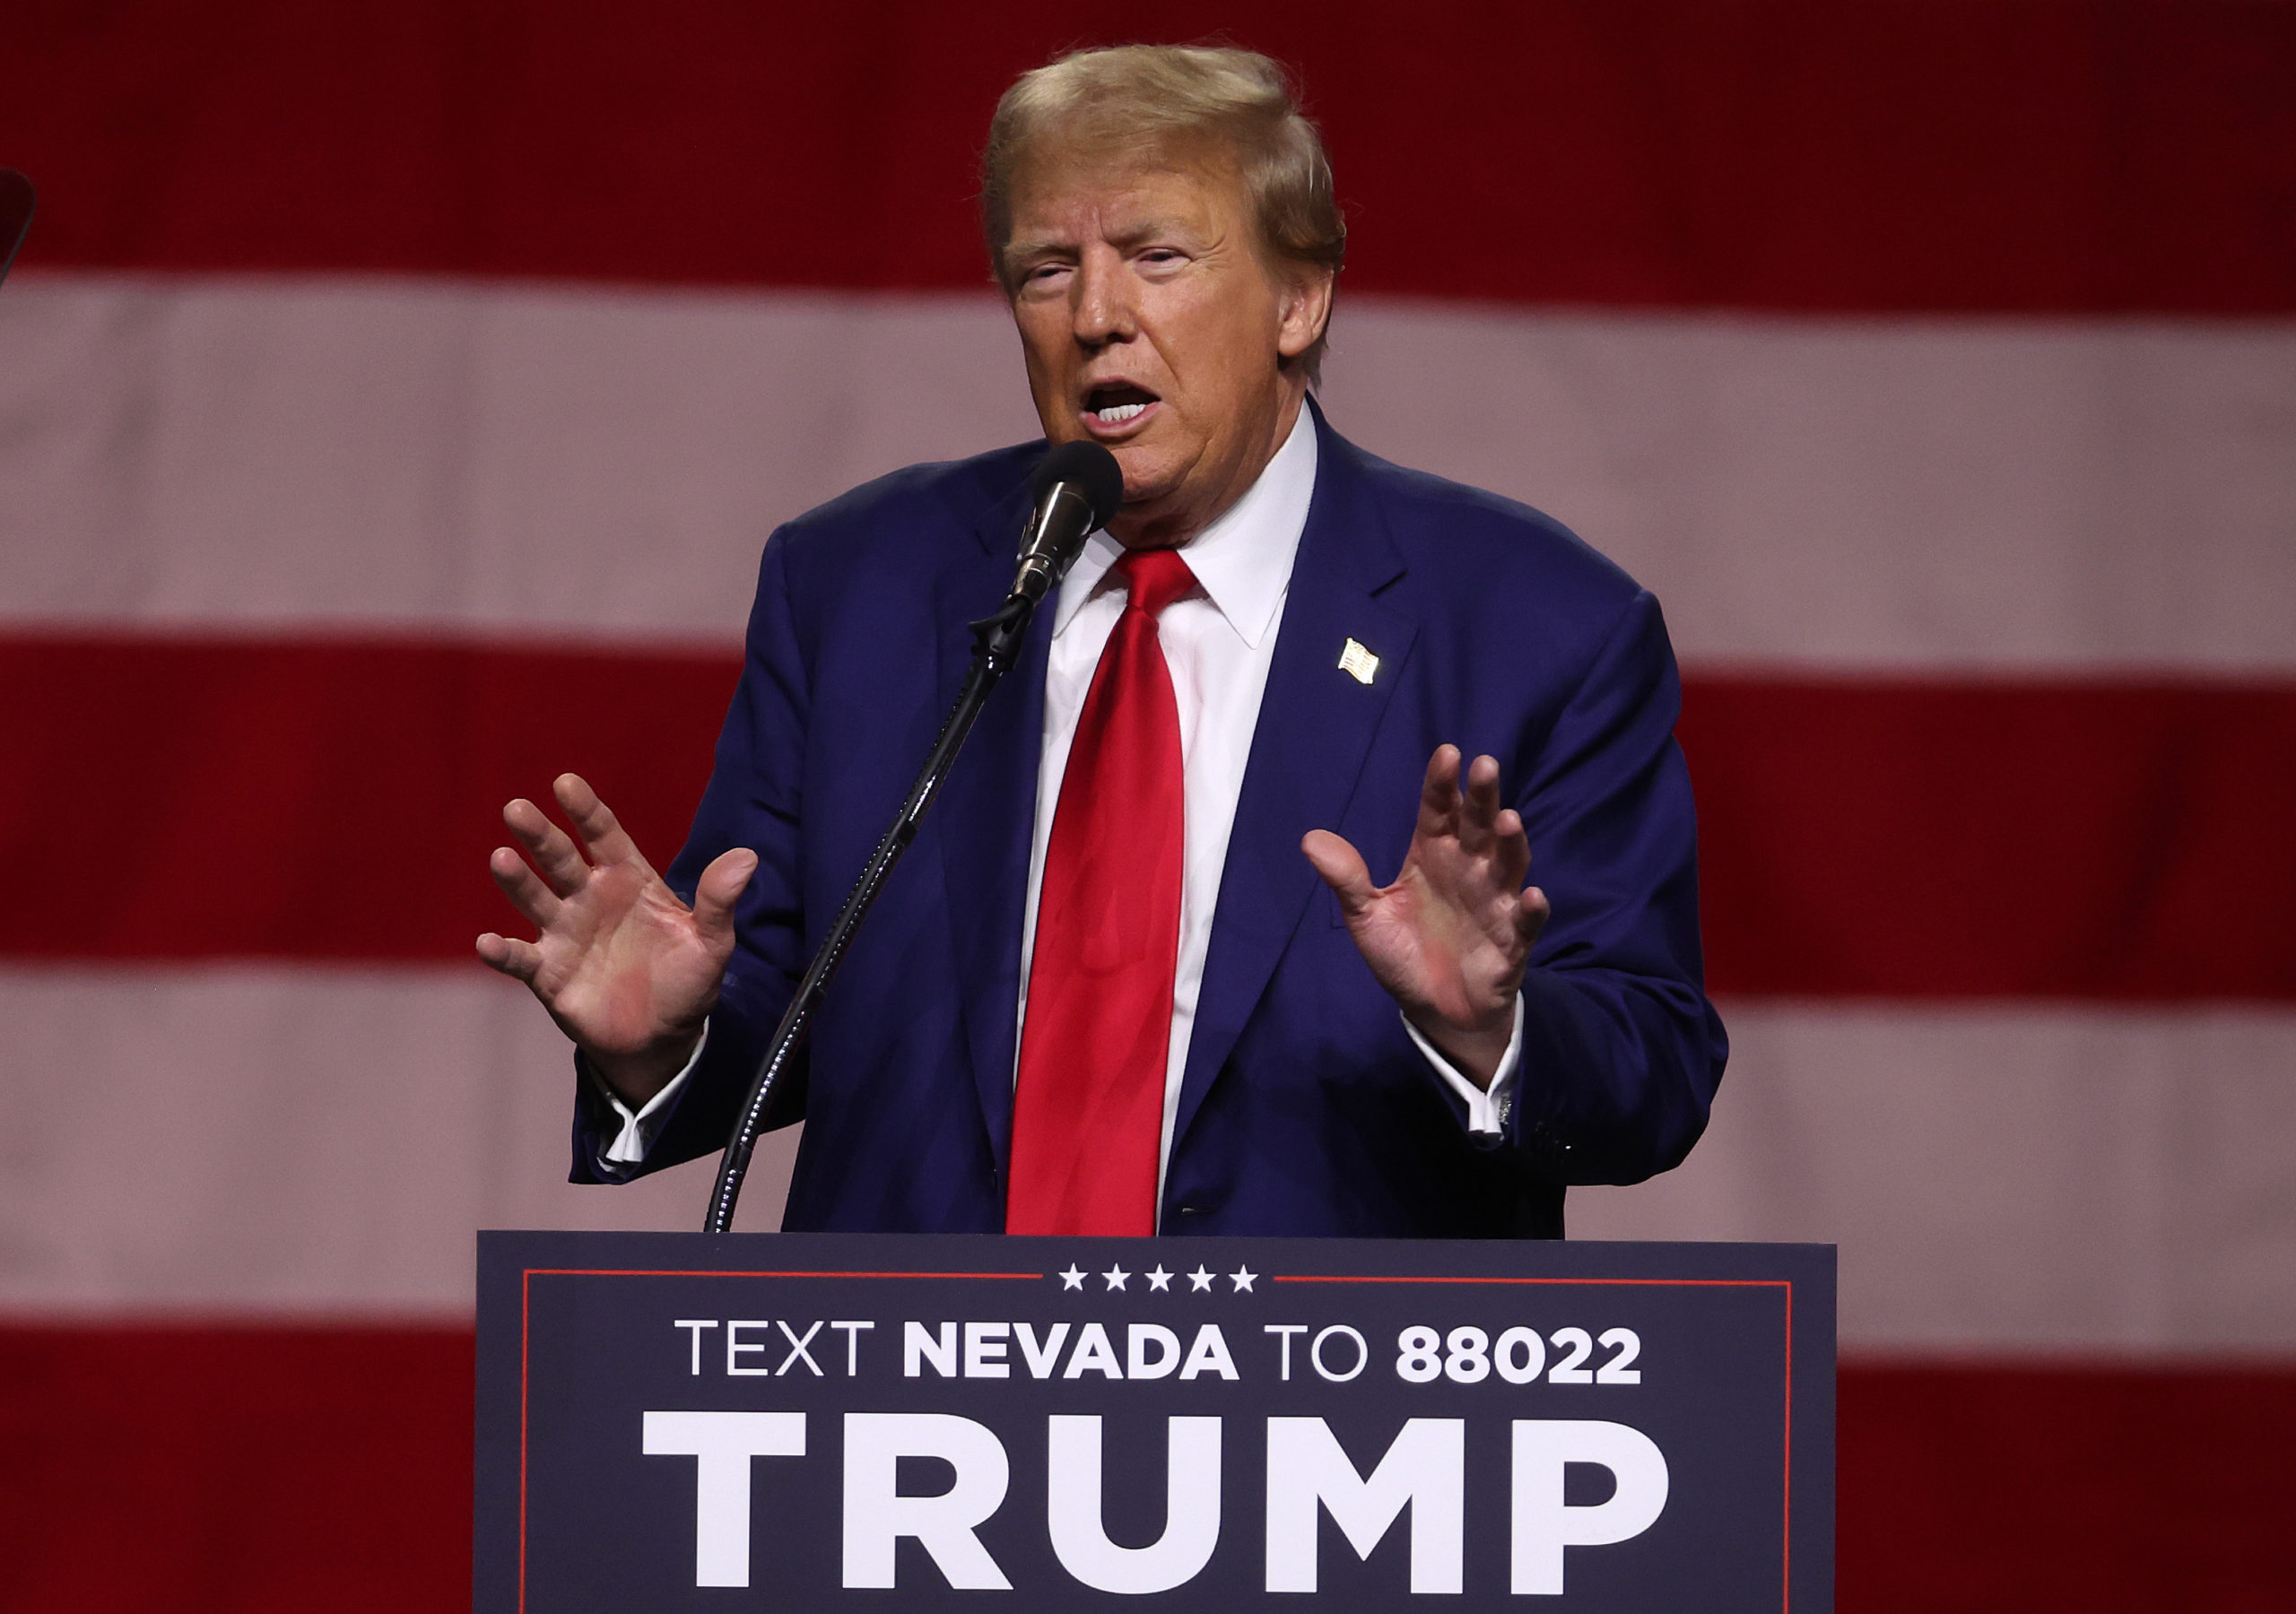 RENO, NEVADA - DECEMBER 17: Republican Presidential candidate former U.S. President Donald Trump delivers remarks during a campaign rally at the Reno-Sparks Convention Center on December 17, 2023 in Reno, Nevada. Former U.S. President Trump held a campaign rally as he battles to become the Republican Presidential nominee for the 2024 Presidential election. (Photo by Justin Sullivan/Getty Images)